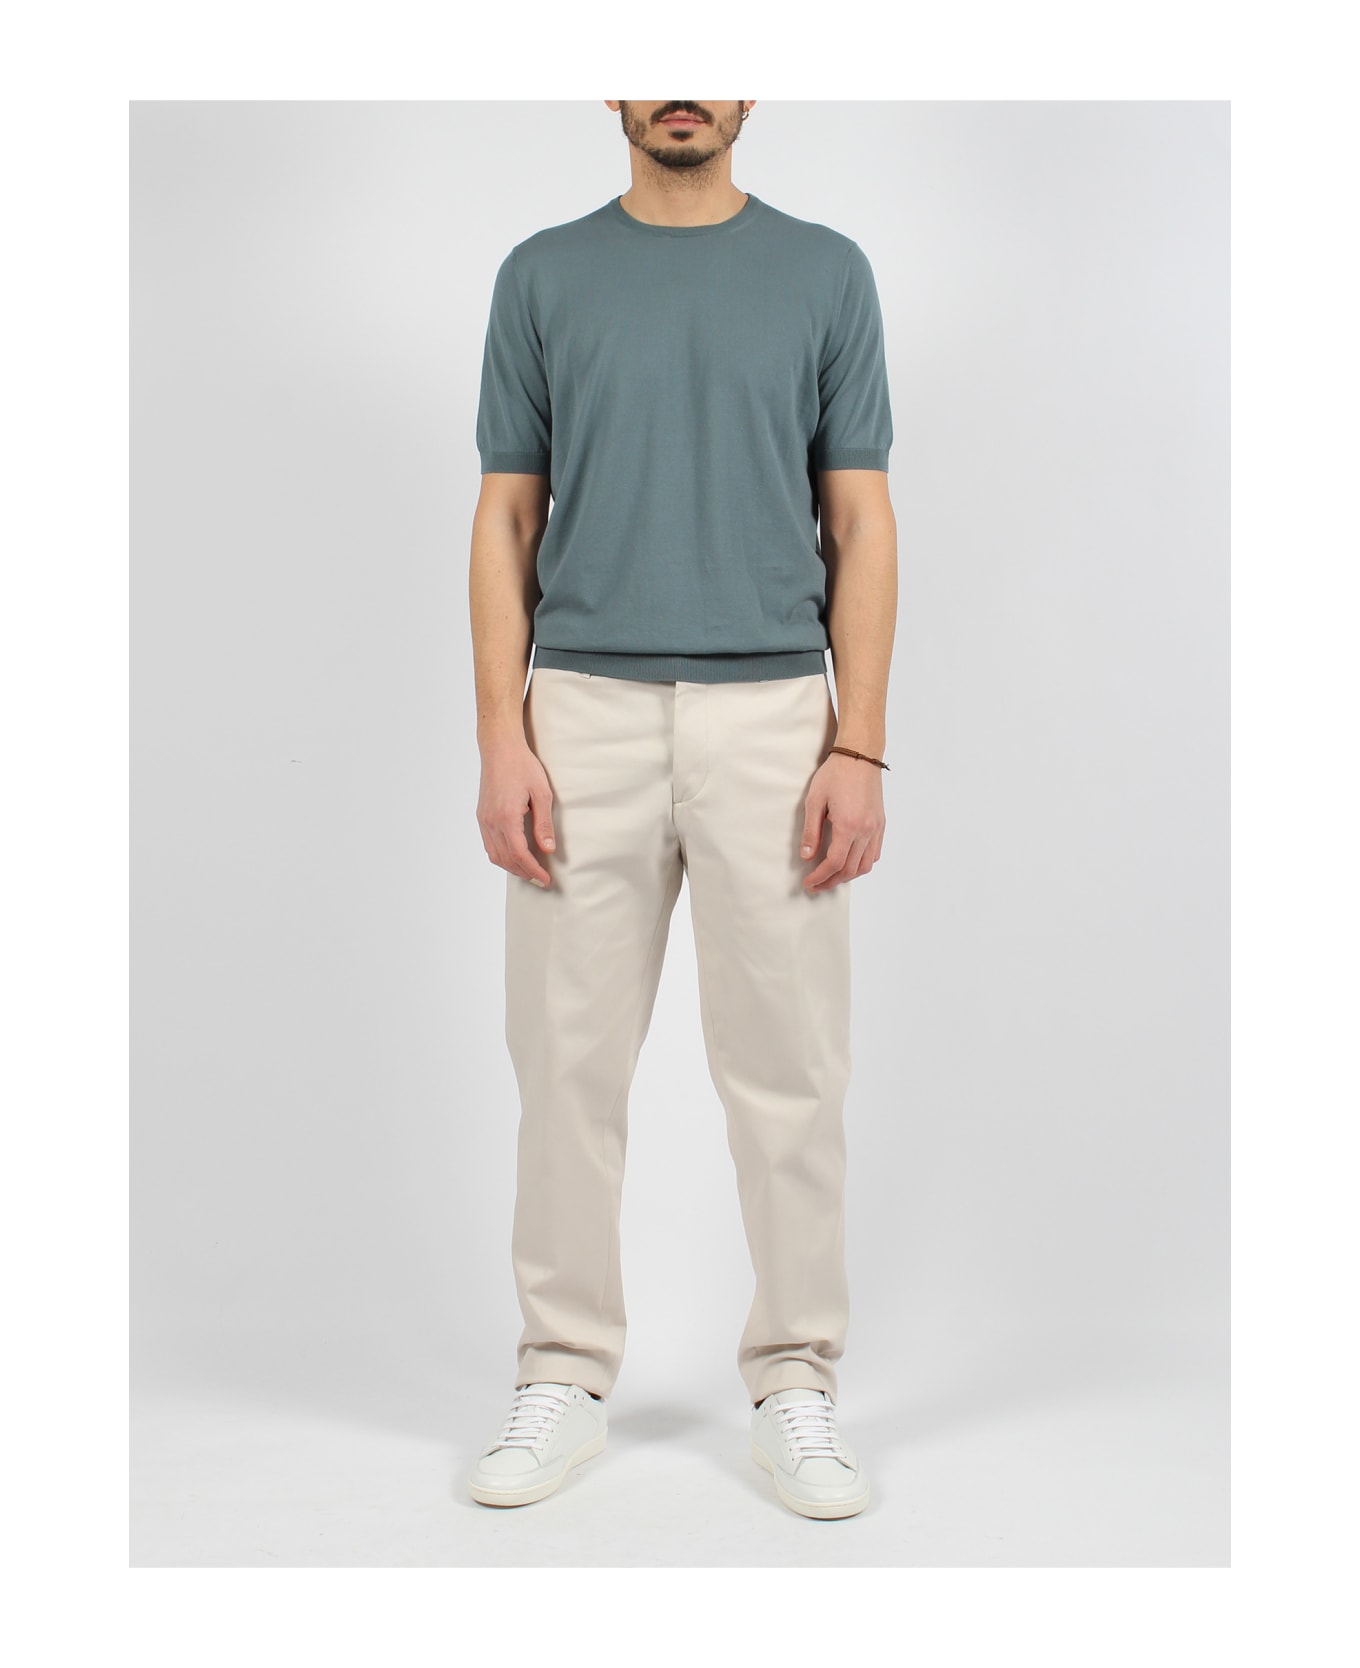 Nine in the Morning Giove Slim Chino Pant - Nude & Neutrals